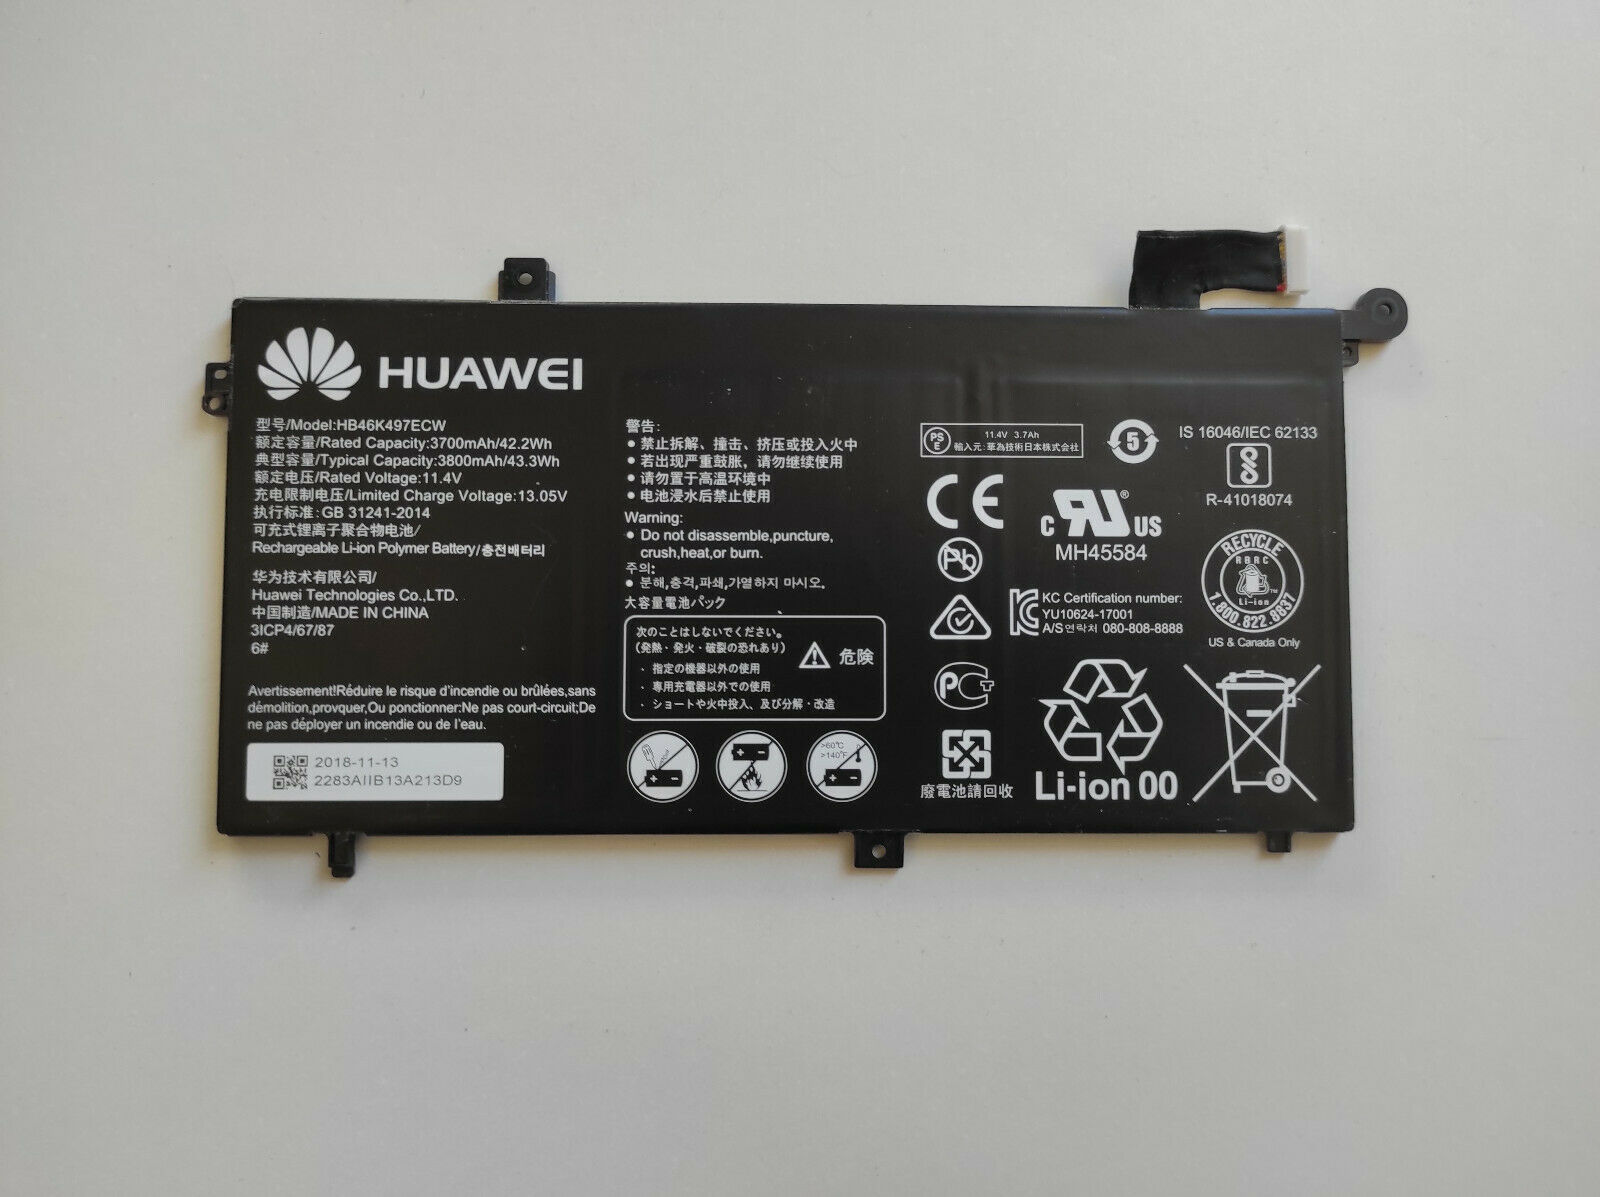 42.2Wh Huawei MateBook D(i5/8G/256G) Battery - Click Image to Close